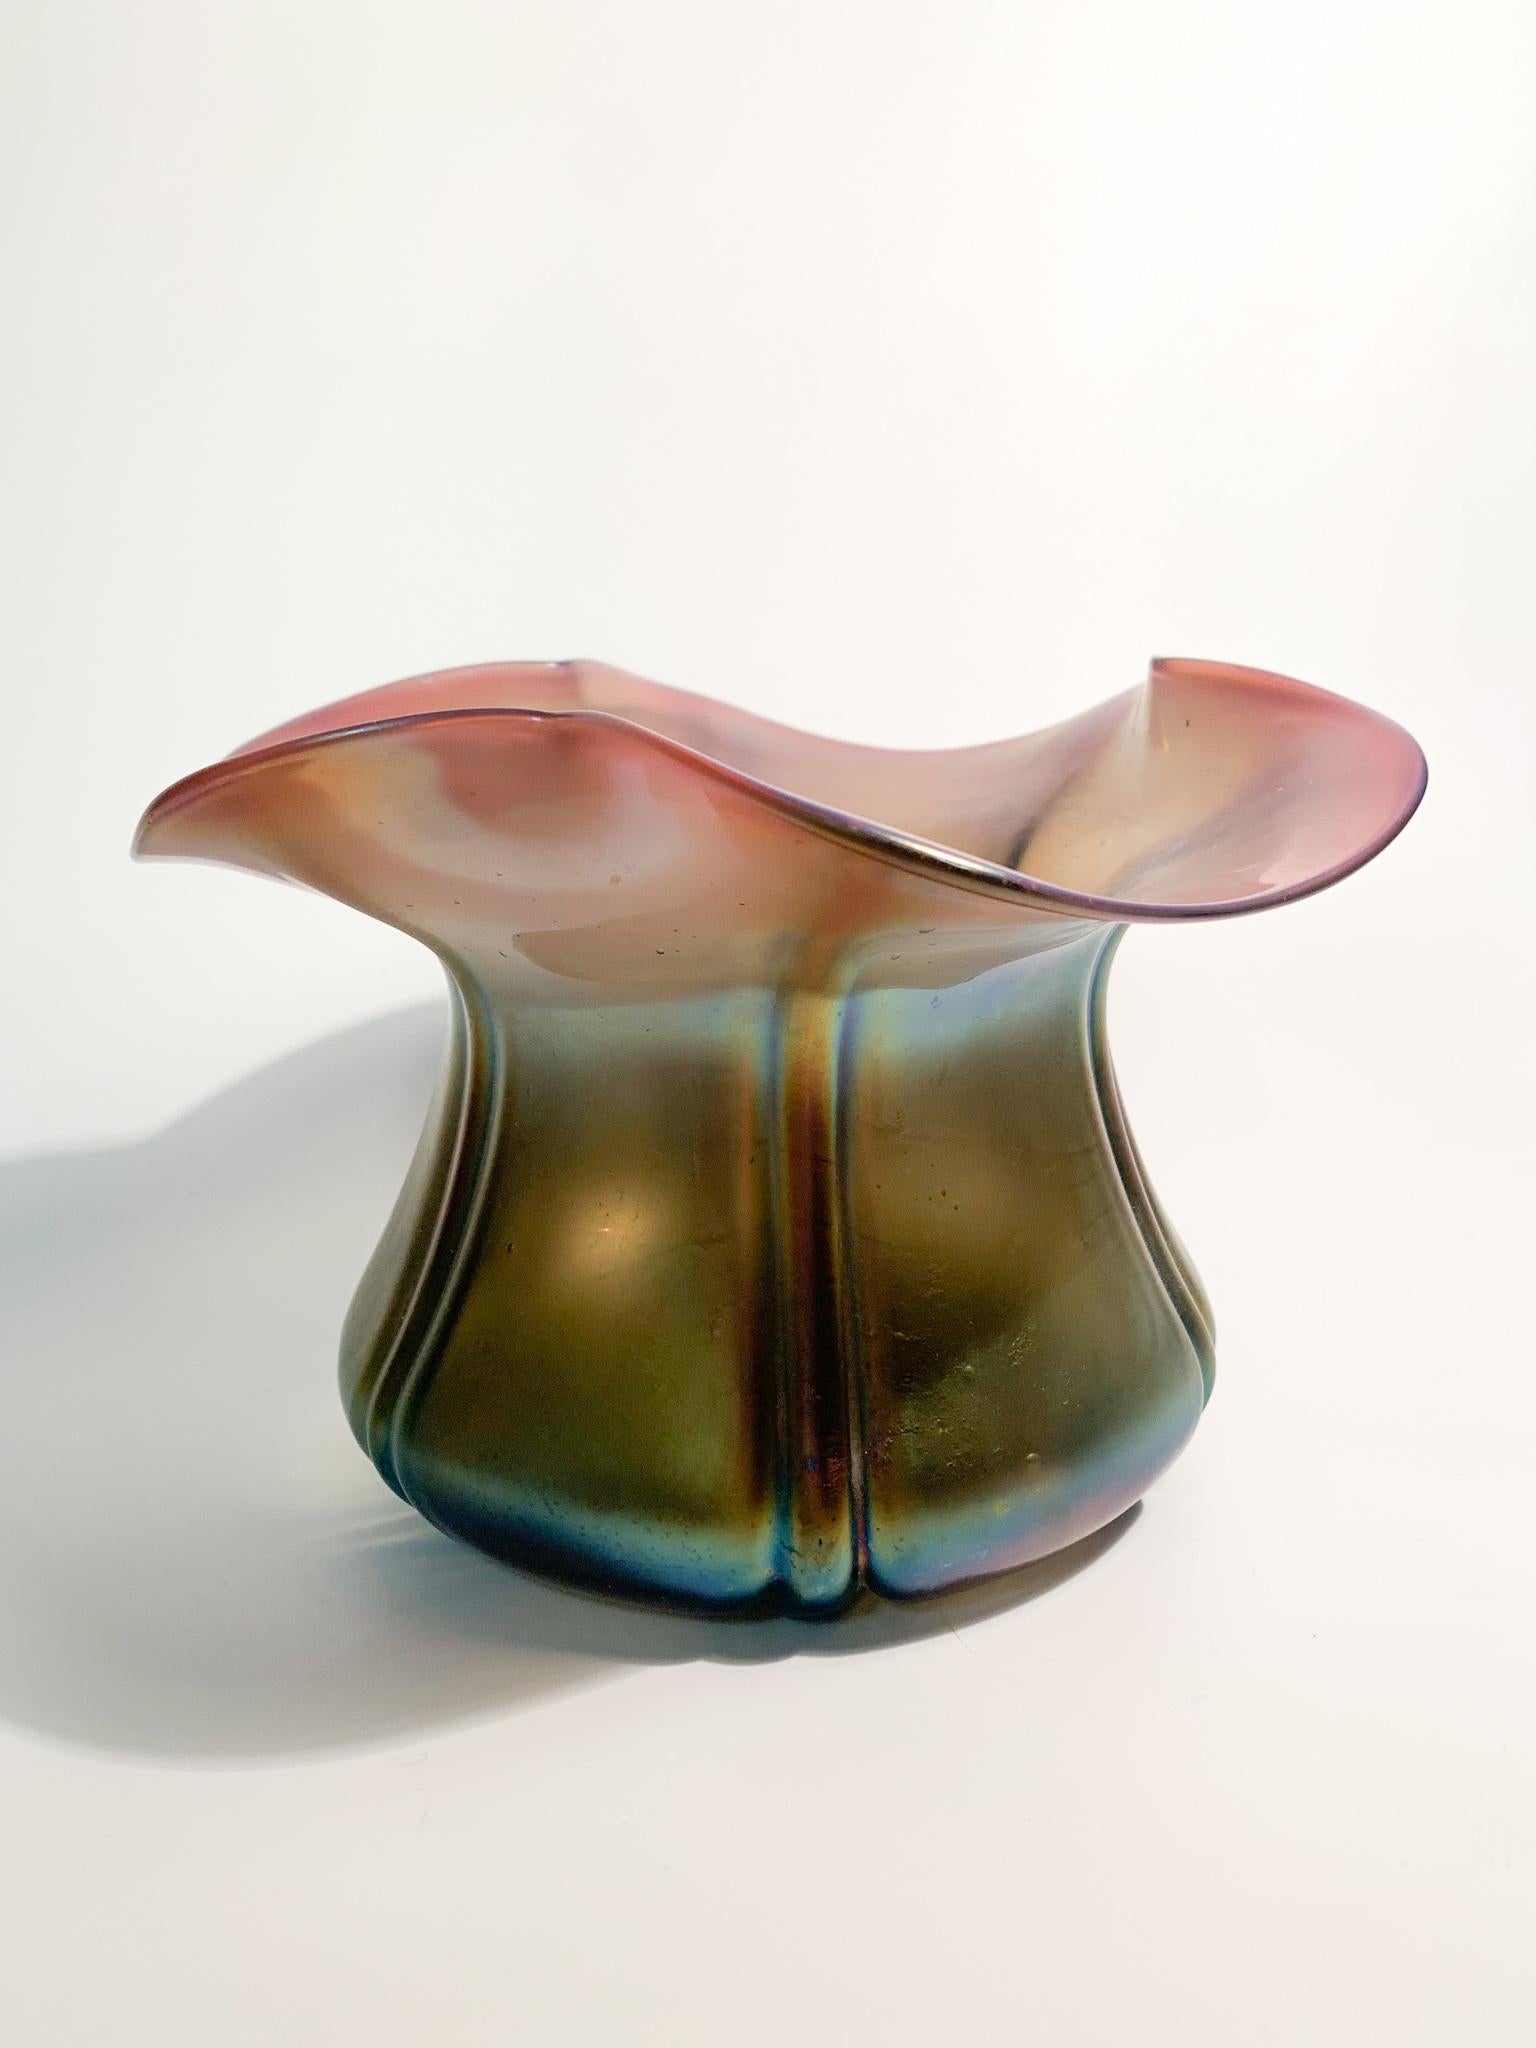 Vase in Austrian iridescent Loetz glass, with a shape with a flower opening and colors from purple to beetle, made in the 1940s

Measures: Ø cm 18 h cm 11

The production of Loetz glass began with Johan Loetz (1778-1848) in the 18th century